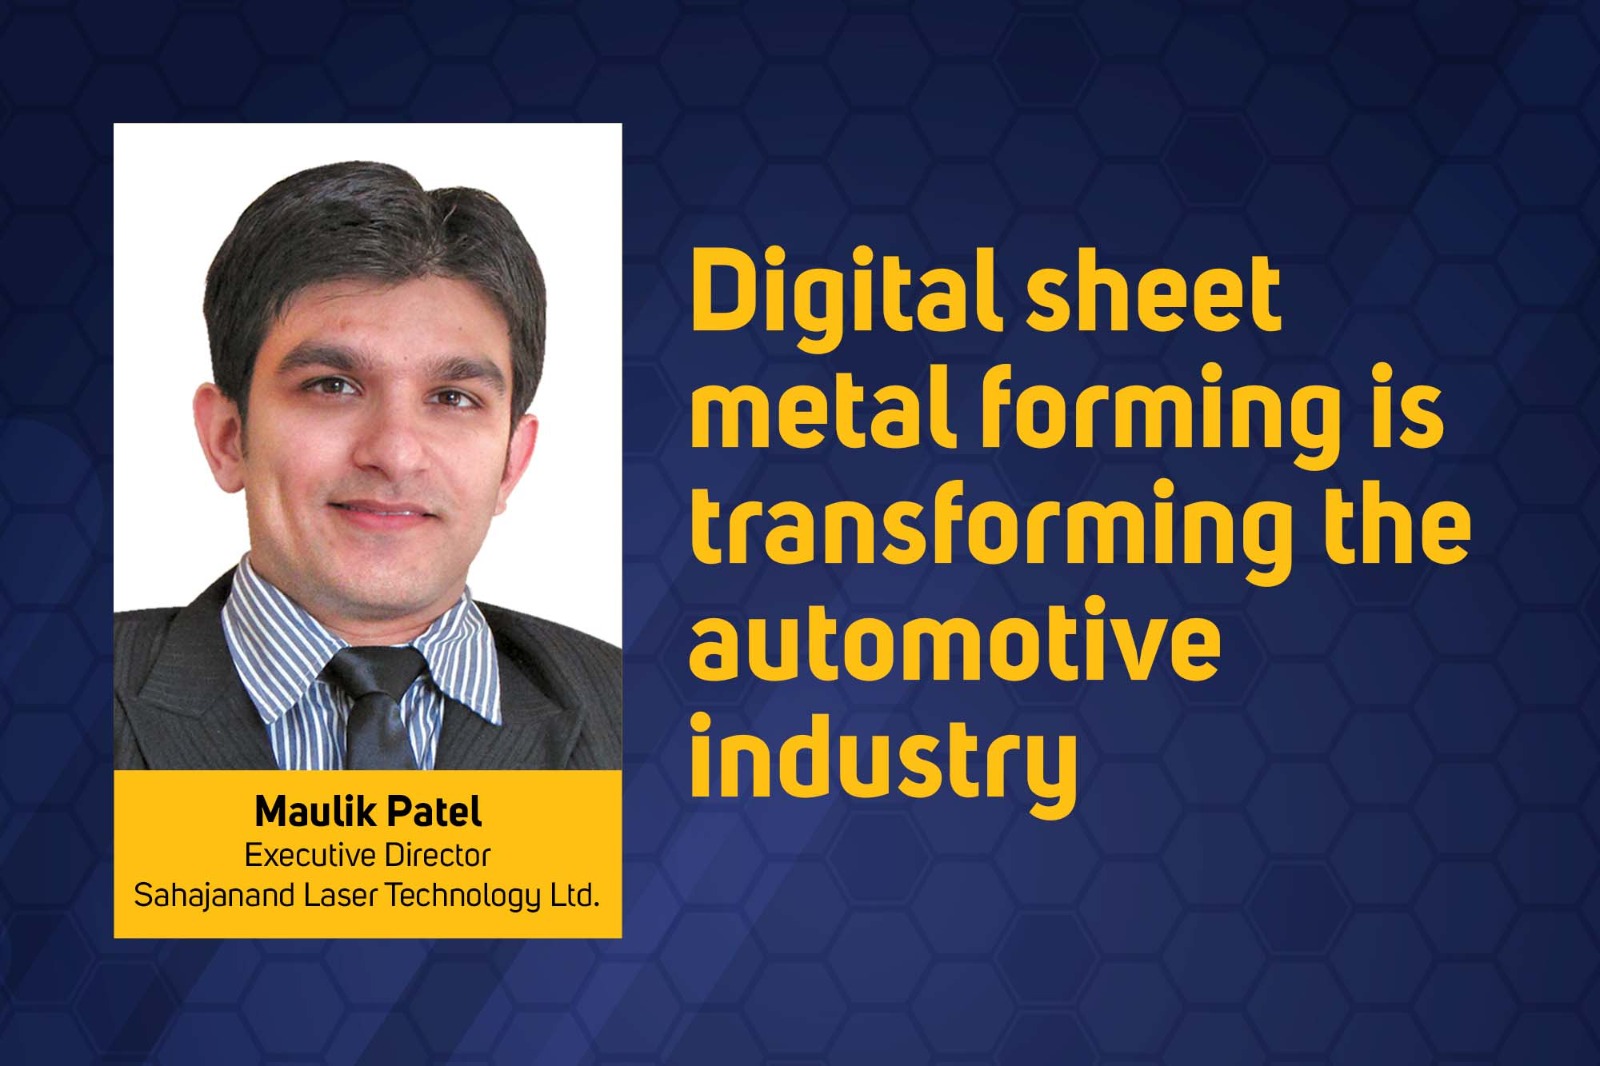 Digital sheet metal forming is transforming the automotive industry